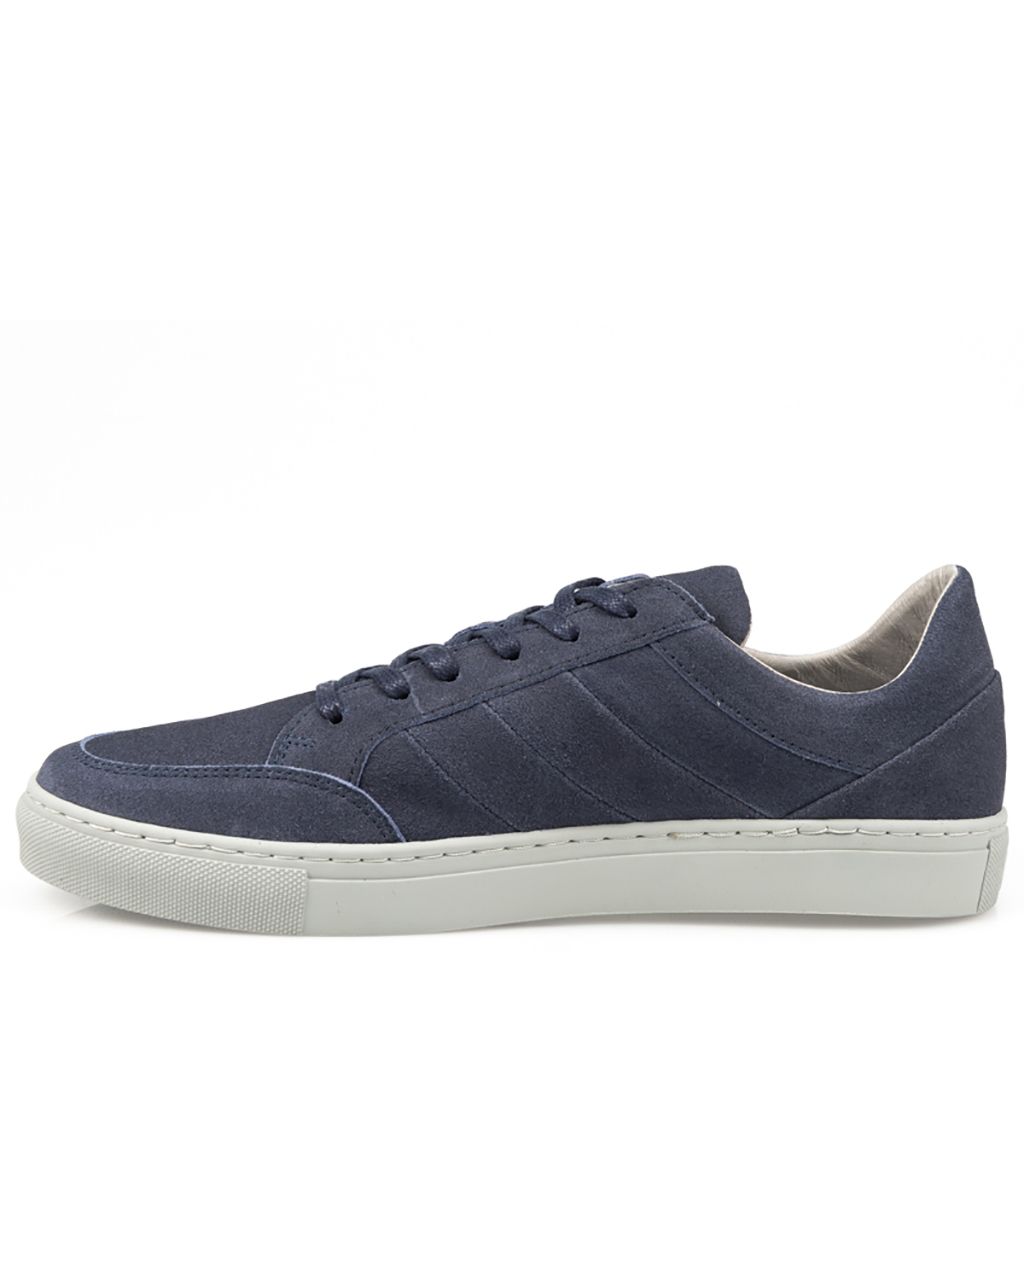 Campbell Classic Sneakers Donkerblauw uni 062378-001-41